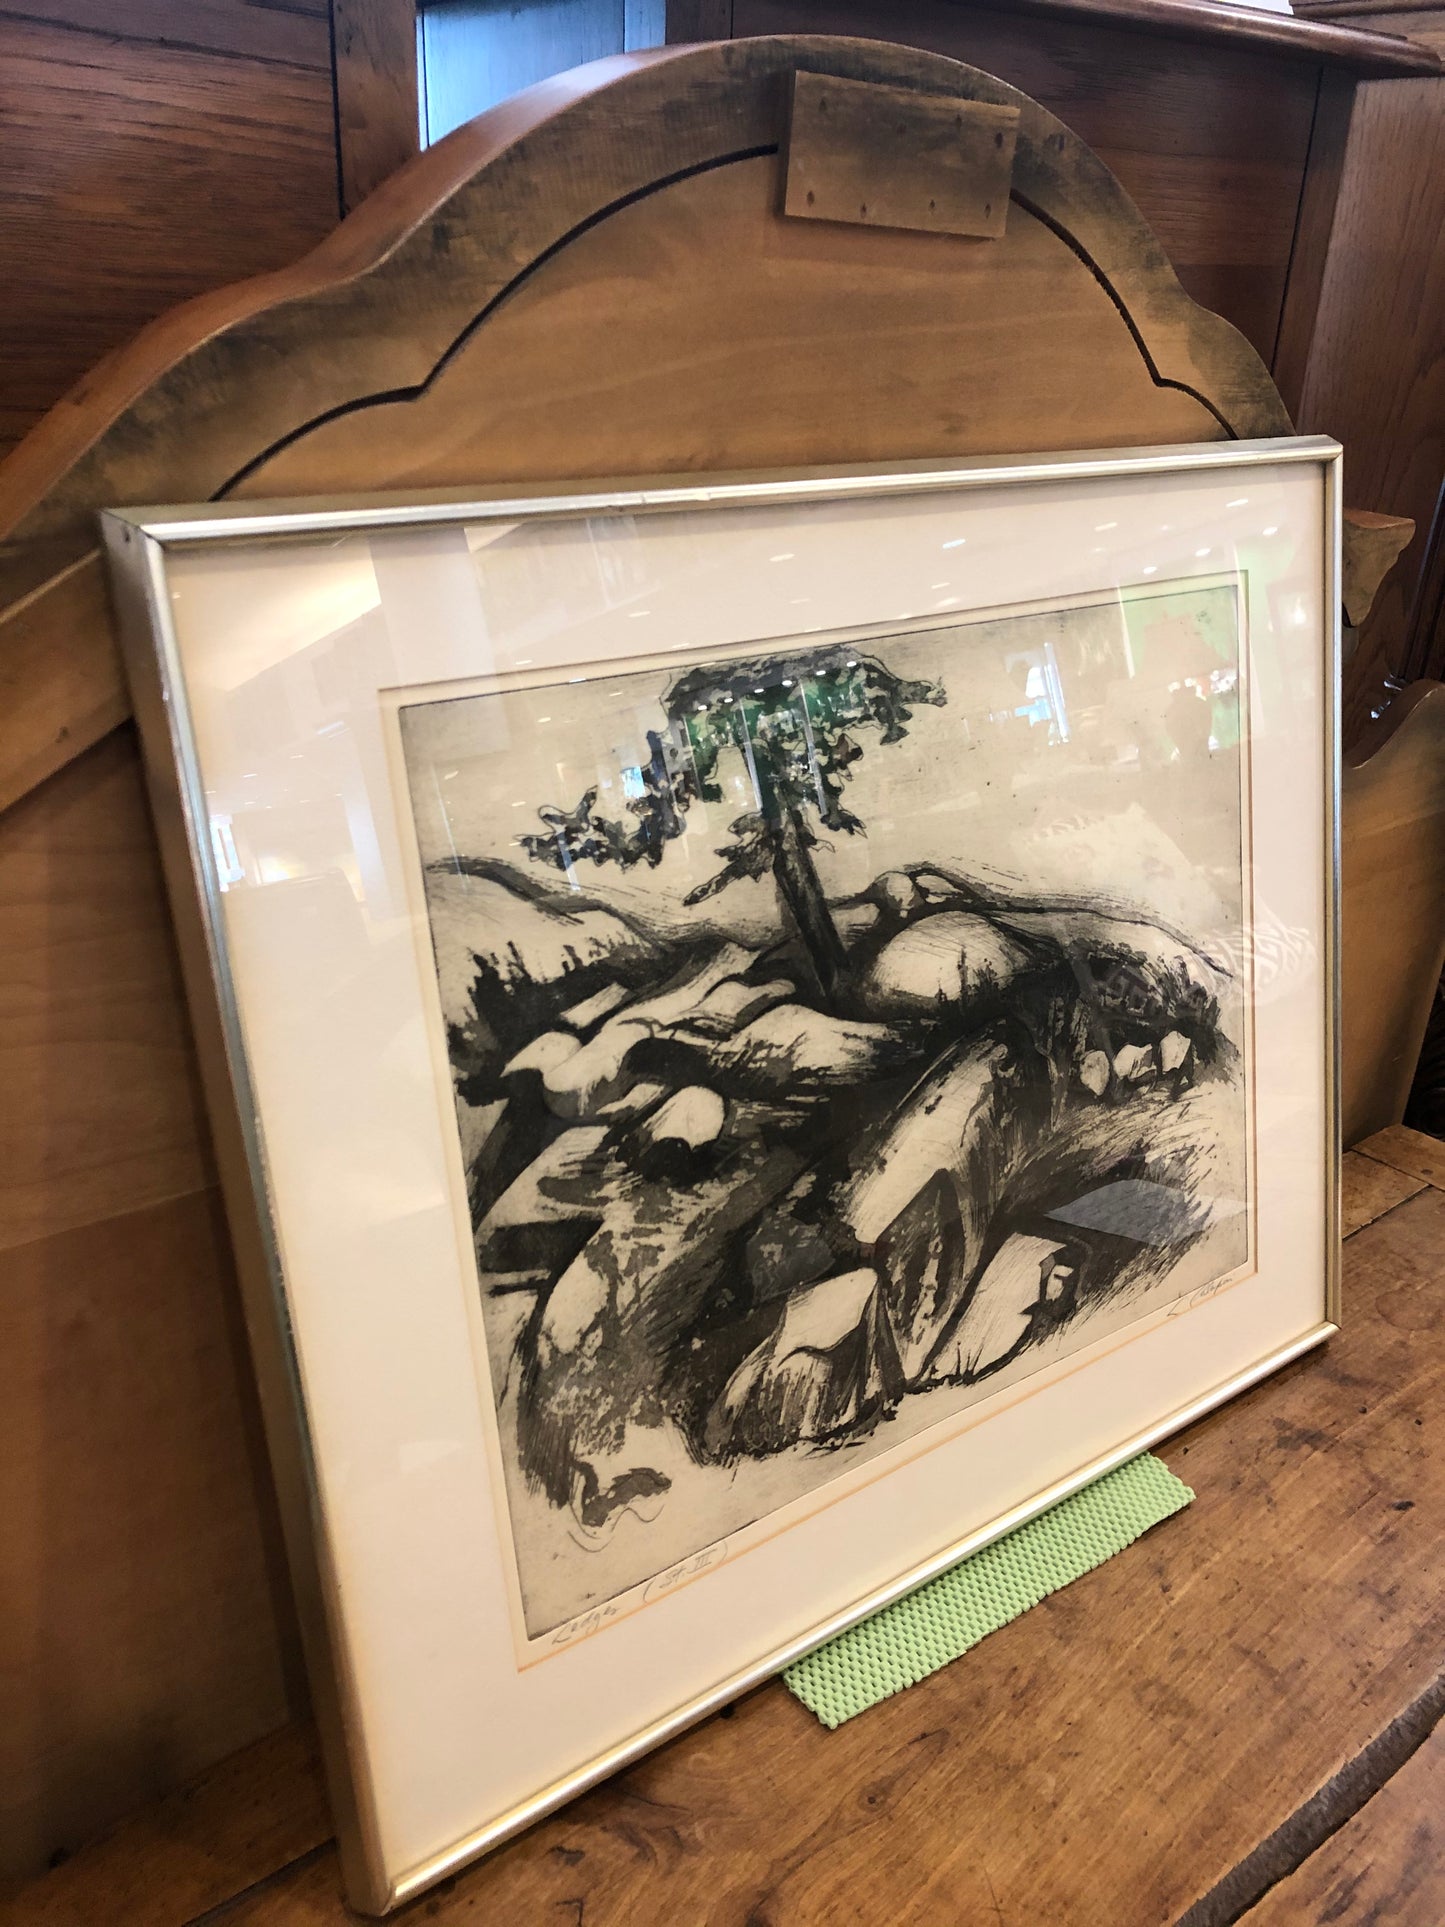 Letterio Calapai Framed Etching "Ledges"